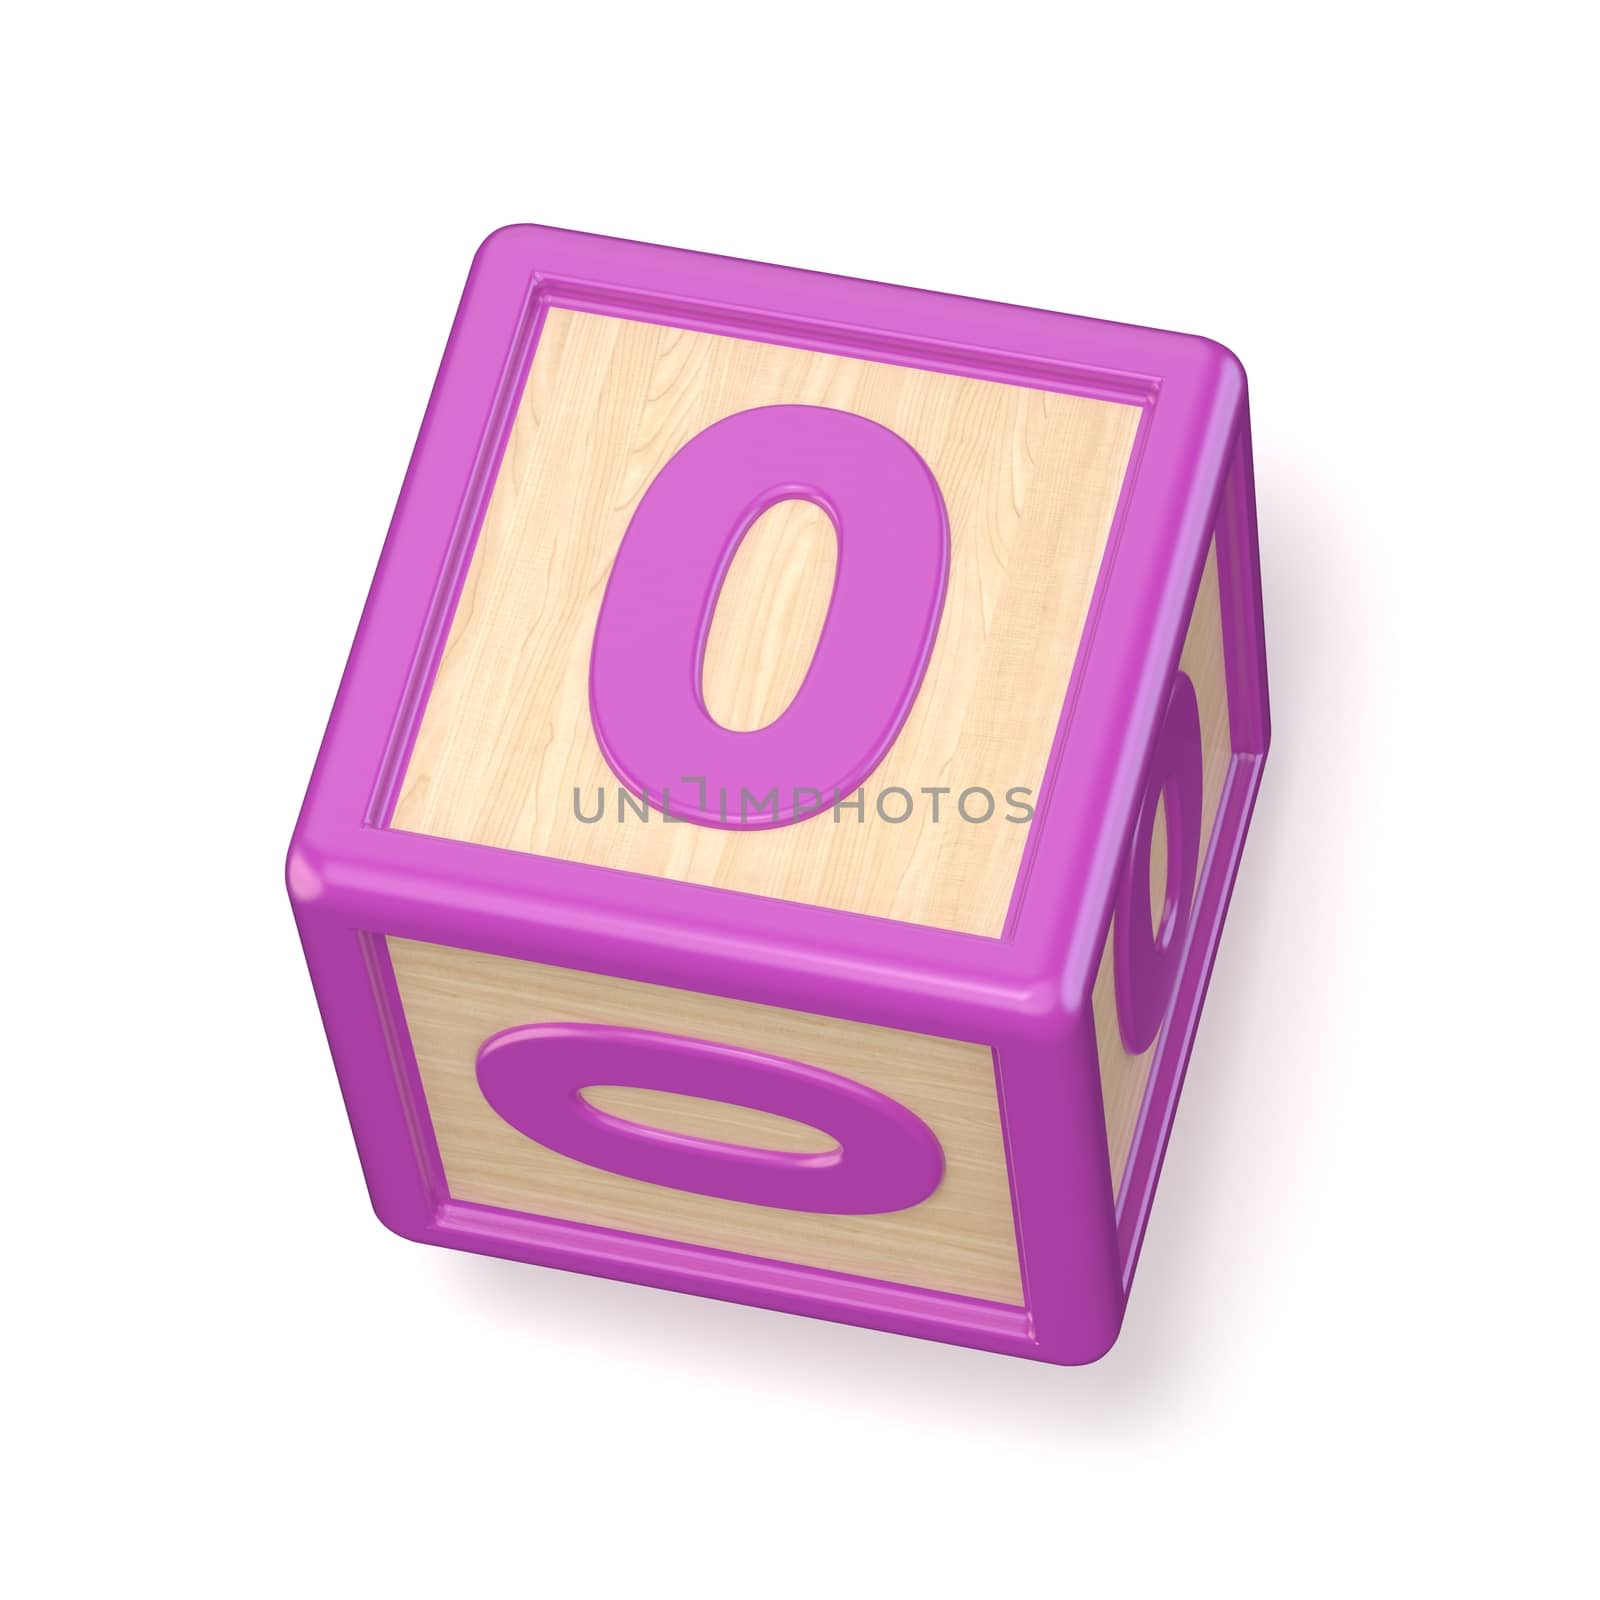 Number 0 ZERO wooden alphabet blocks font rotated. 3D by djmilic